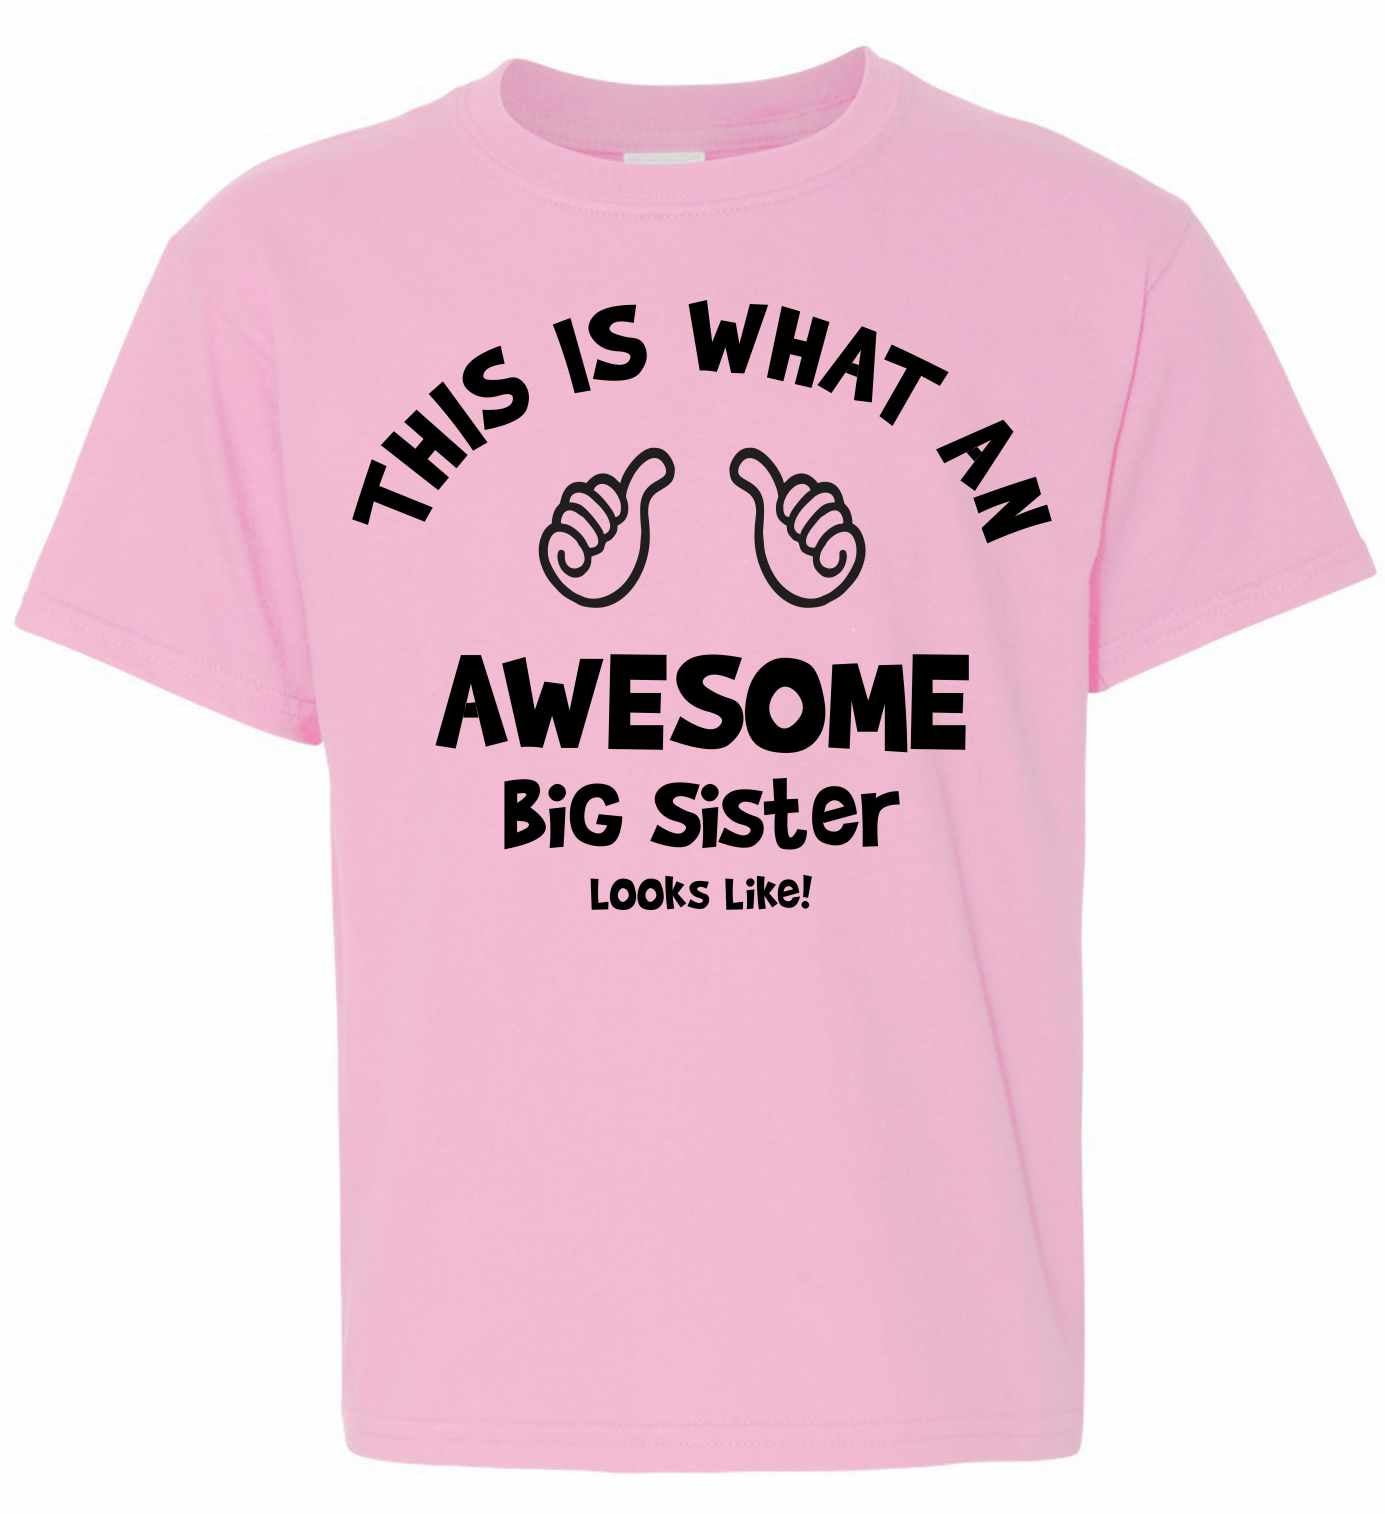 This is What an AWESOME BIG SISTER Looks Like on Kids T-Shirt (#969-201)